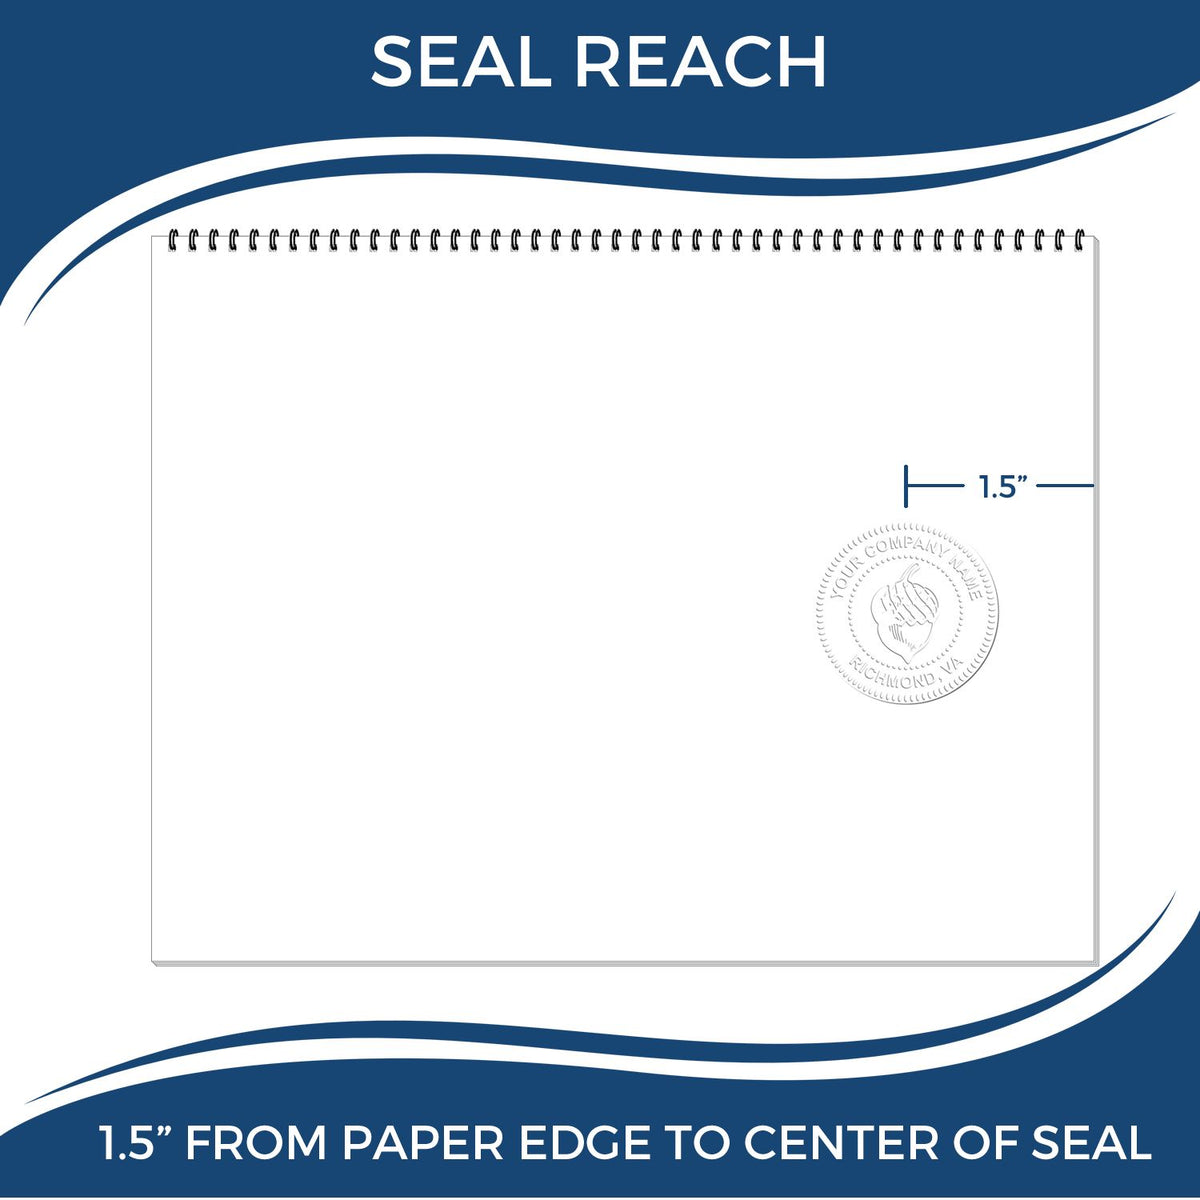 An infographic showing the seal reach which is represented by a ruler and a miniature seal image of the Soft Pocket New Hampshire Landscape Architect Embosser